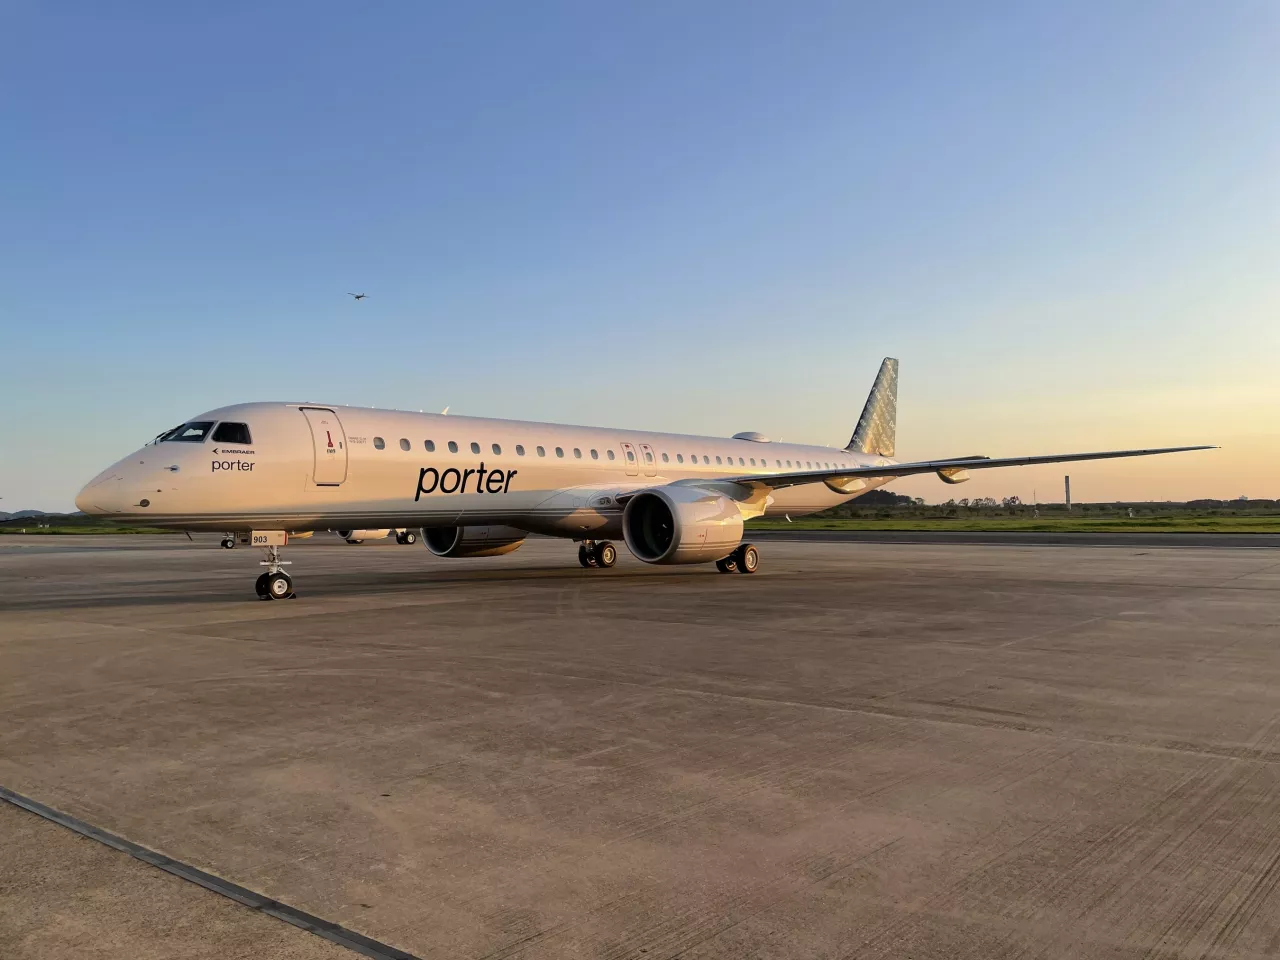 Porter Aircraft Leasing Corp., a wholly-owned subsidiary of Porter Aviation Holdings Inc. (Porter), has agreed to sale and leaseback financing with Avolon for 10 Embraer E195-E2 aircraft. (CNW Group/Porter Airlines Inc.) img#1